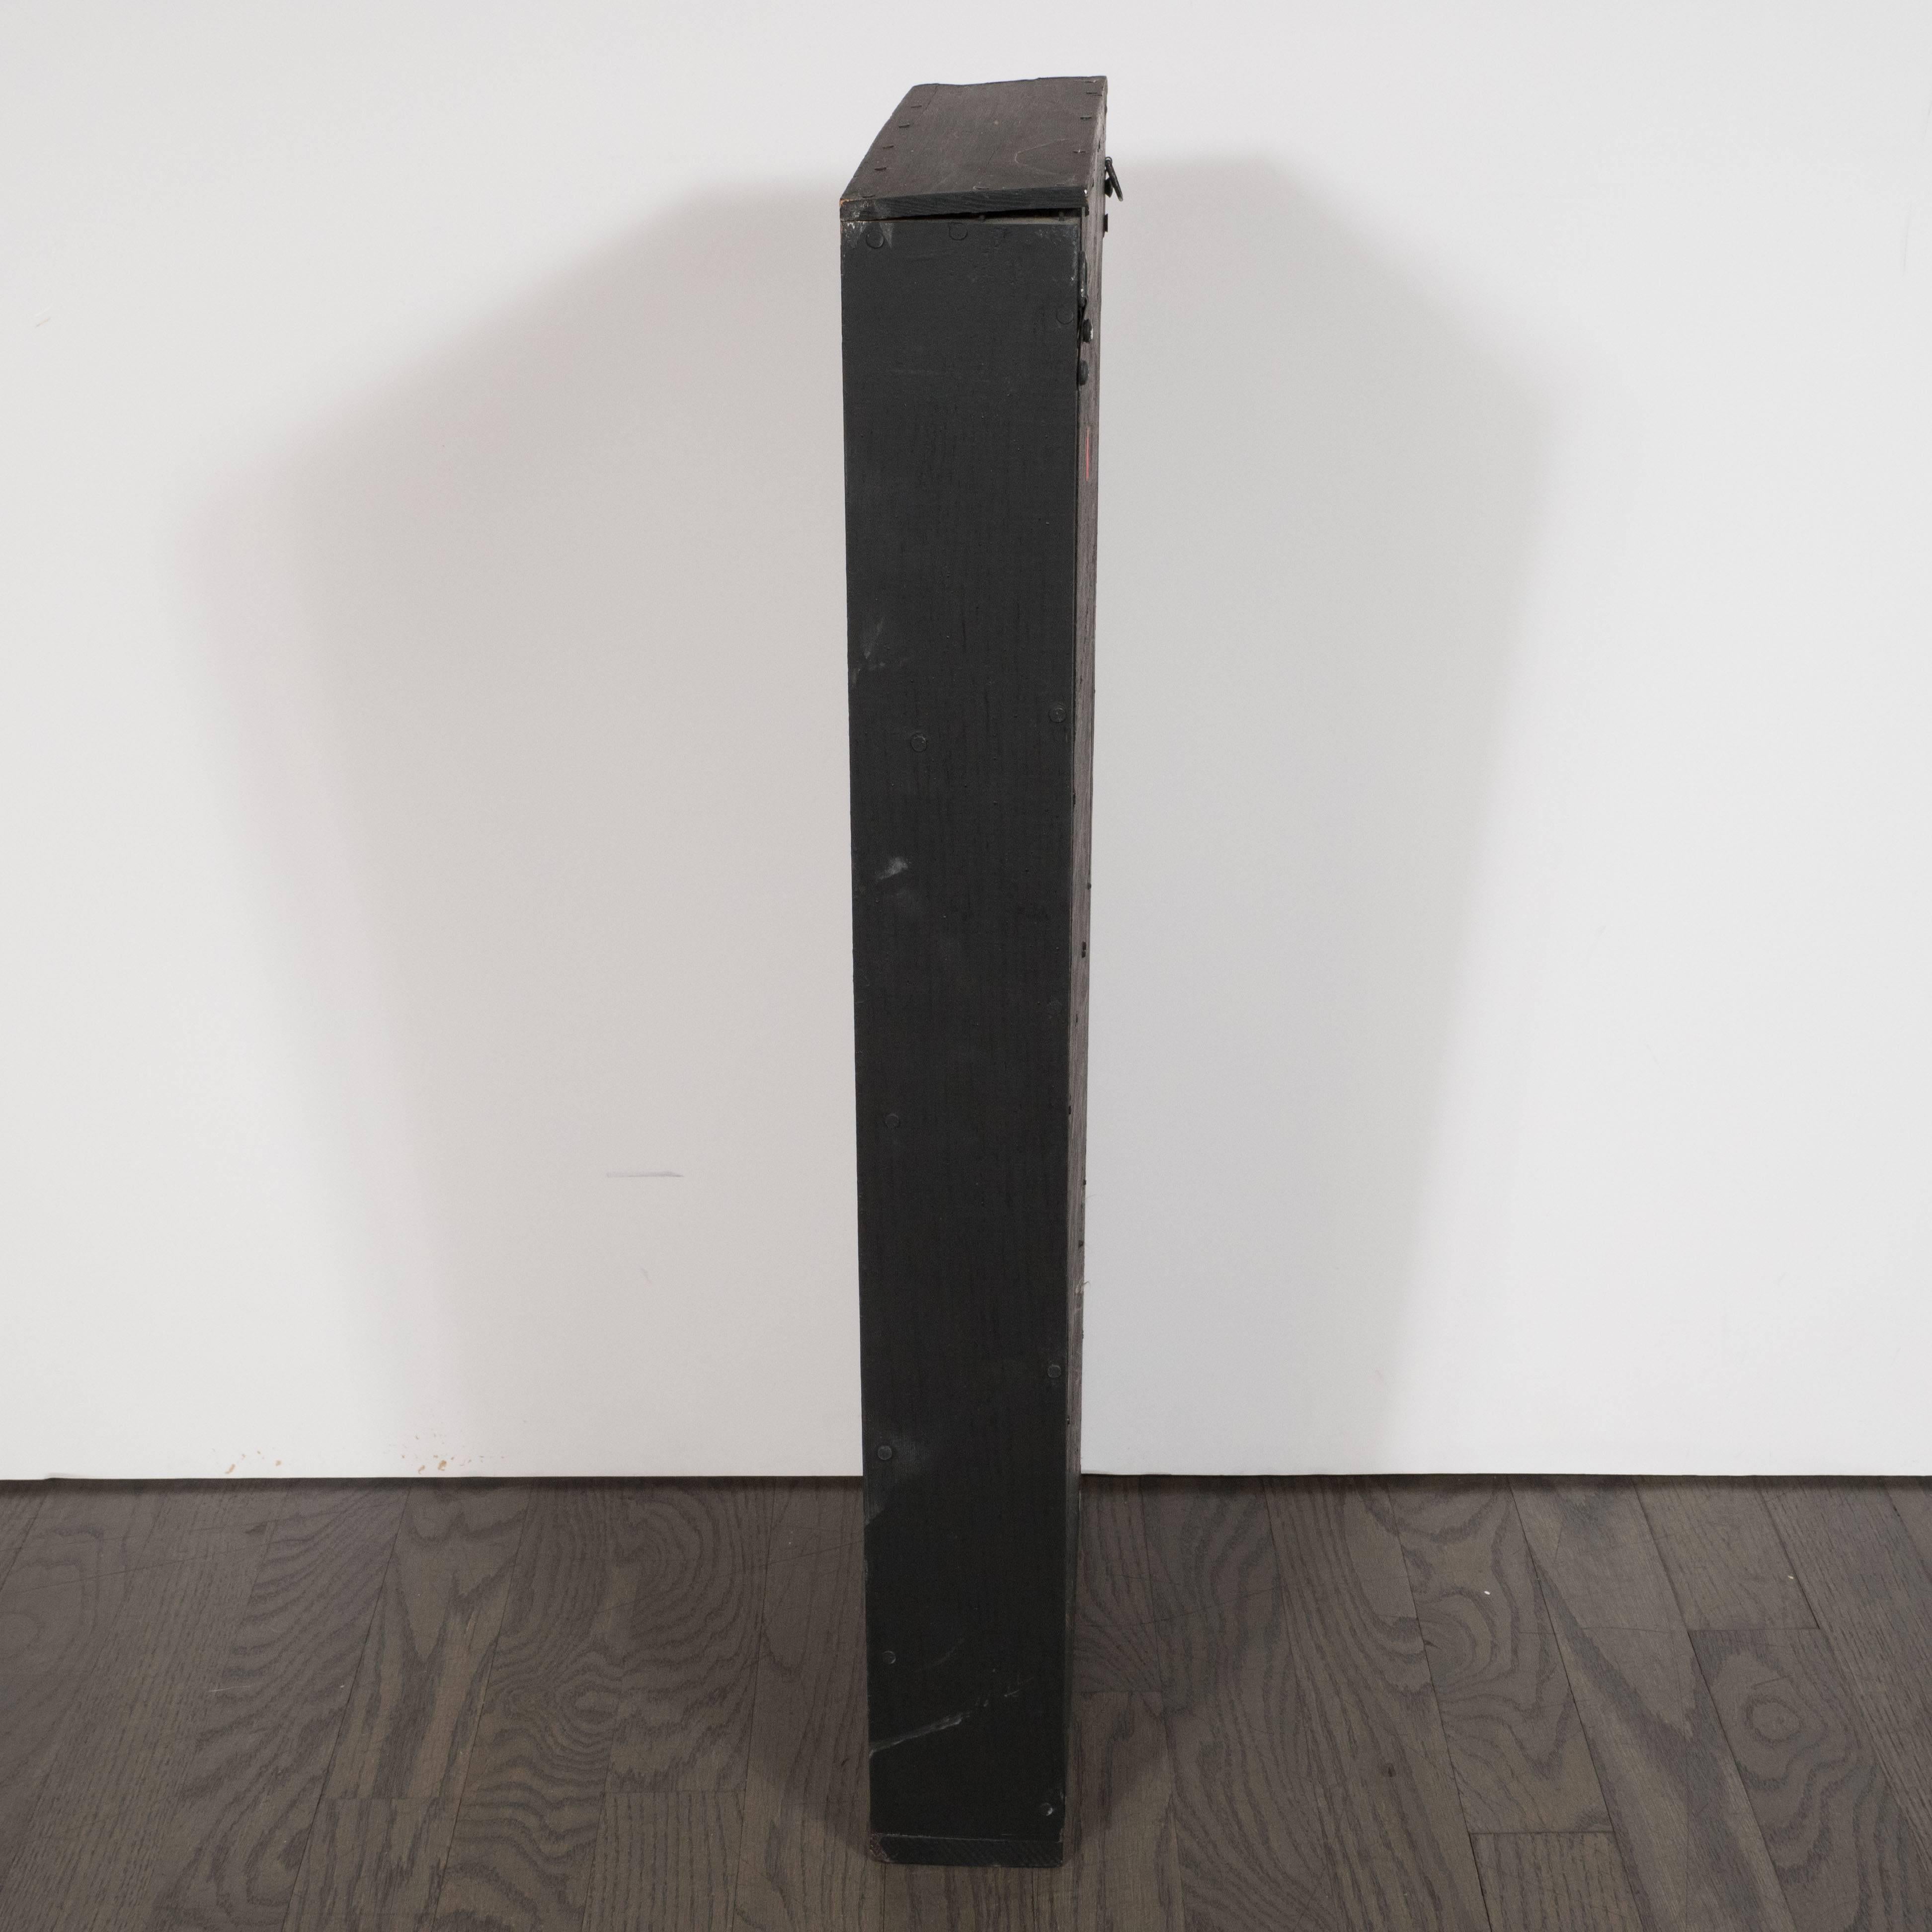 This dynamic mixed media construction was realized by the esteemed American artist Ladislas Segy (1904-1988)- whose work is represented in the collection of the Brooklyn Museum of Art- circa 1965. It consists of nine cylindrical aluminum rods